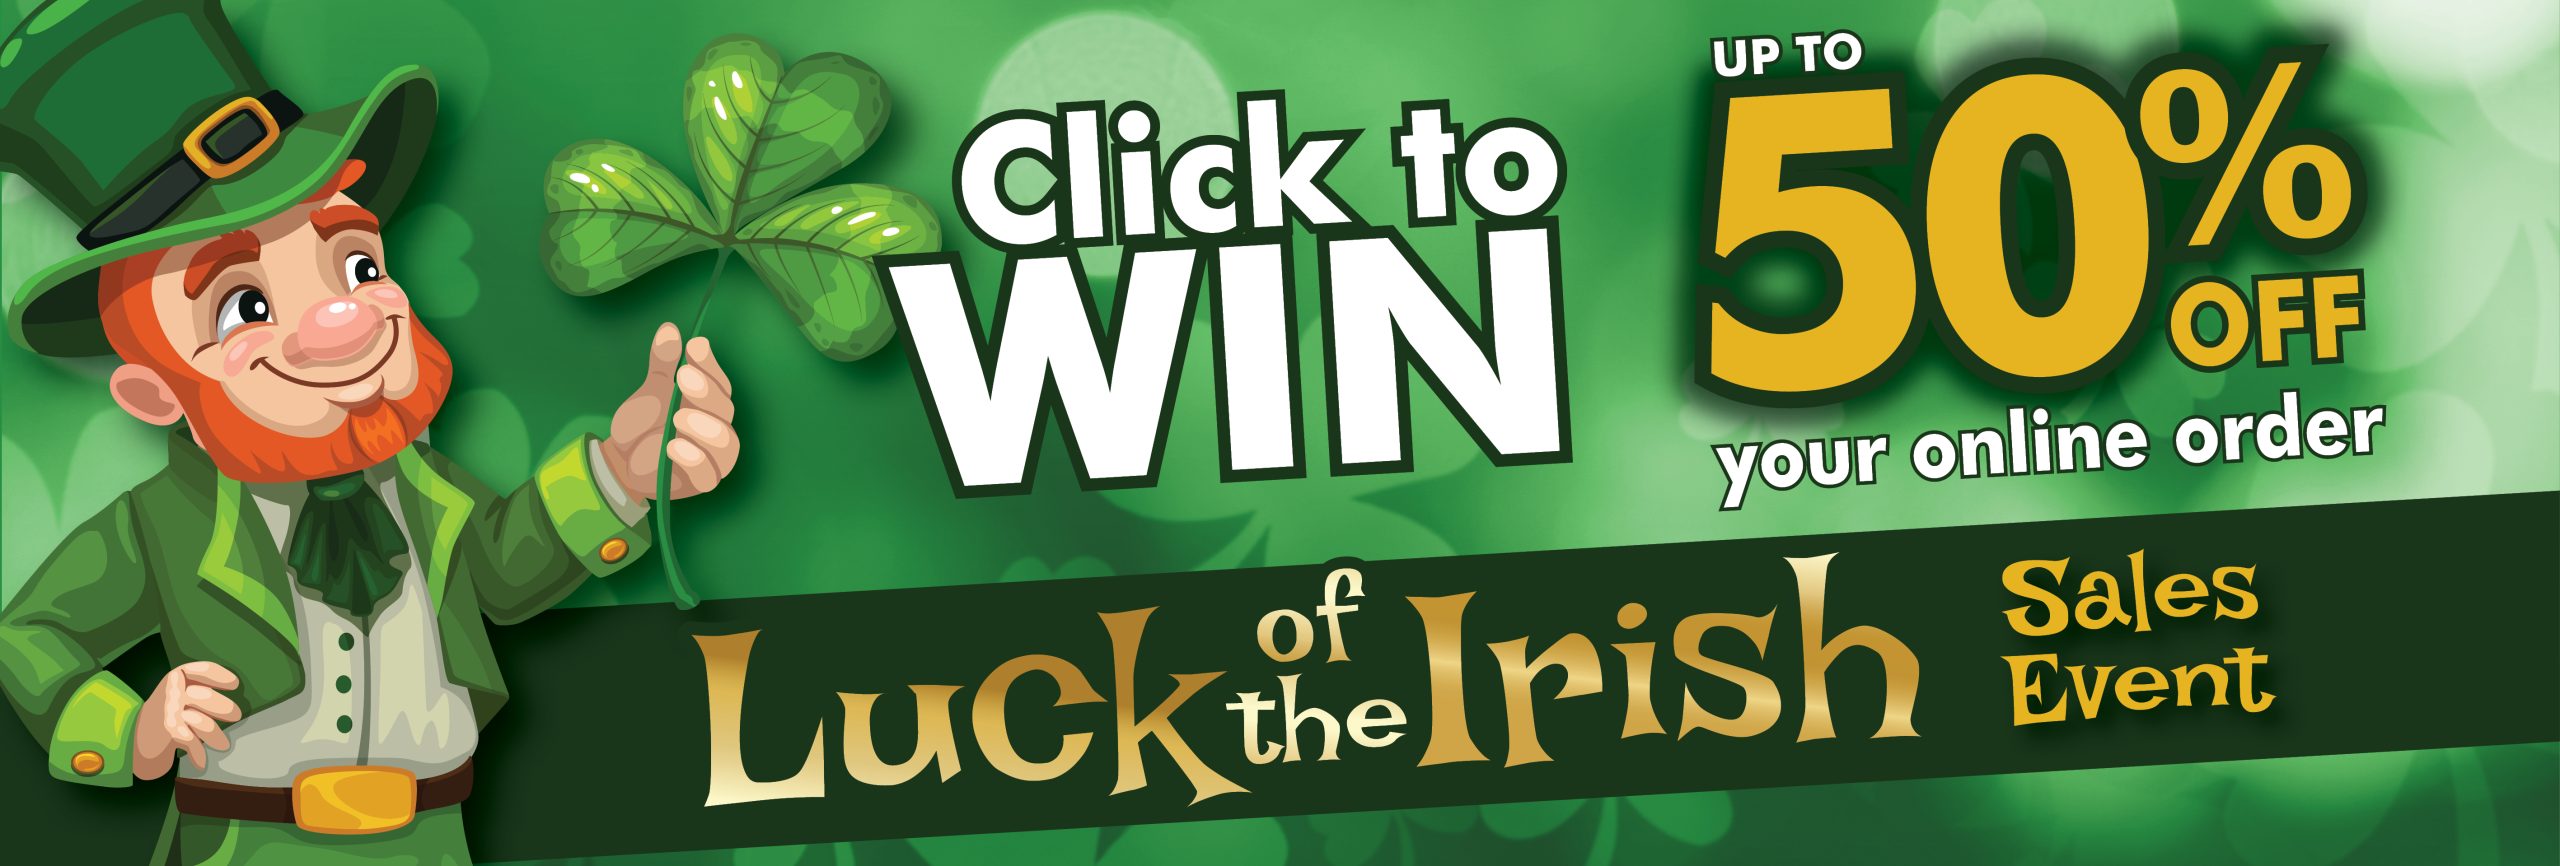 Luck of the Irish web page banner scaled